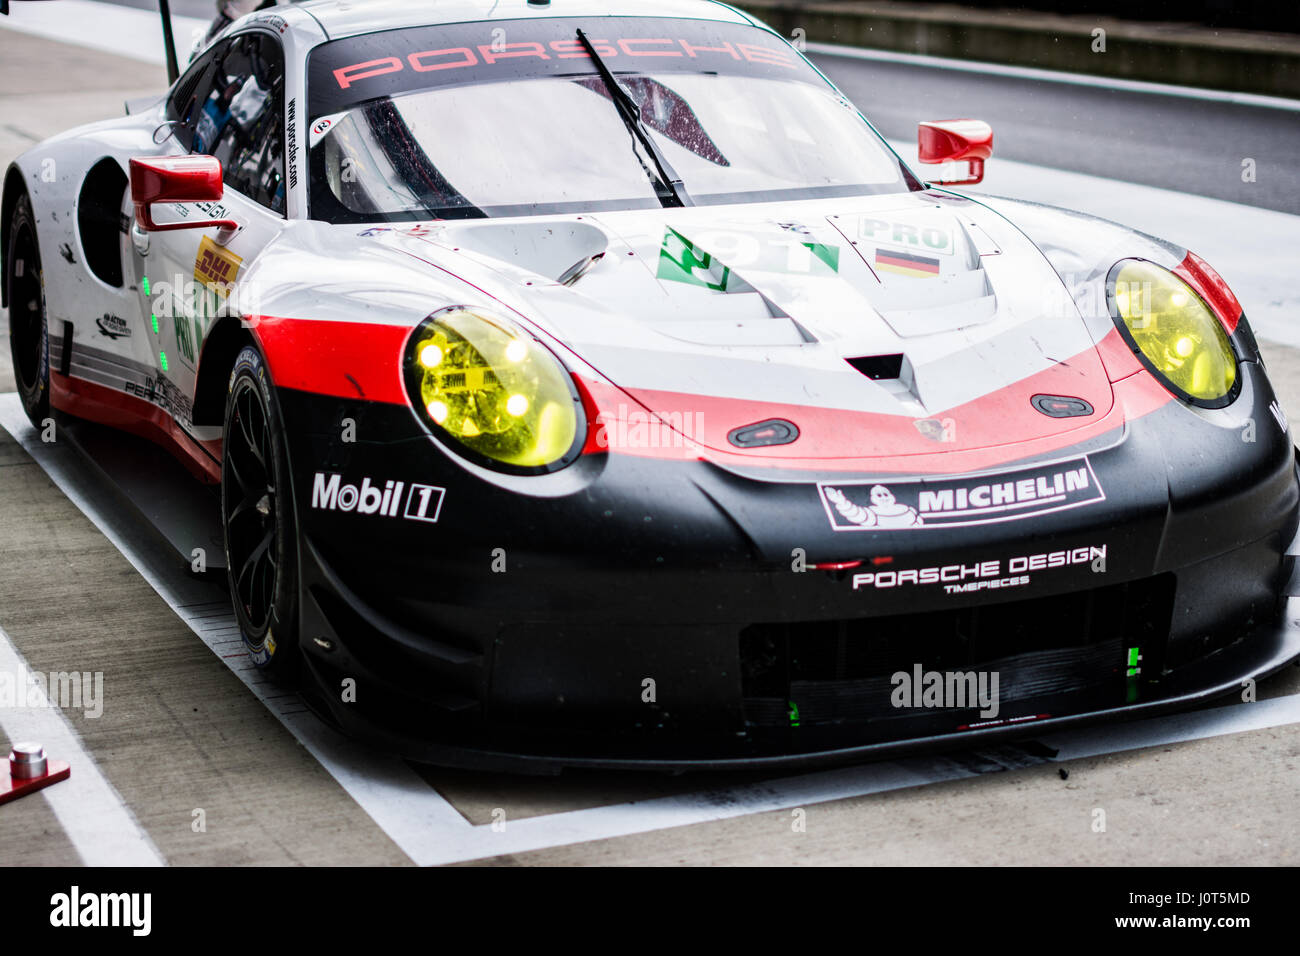 Towcester, Northamptonshire, UK. 16th Apr, 2017. FIA WEC racing team Porsche GT Team during the 6 Hours of Silverstone of the FIA World Endurance Championship Autograph session at Silverstone Circuit Credit: Gergo Toth/Alamy Live News Stock Photo